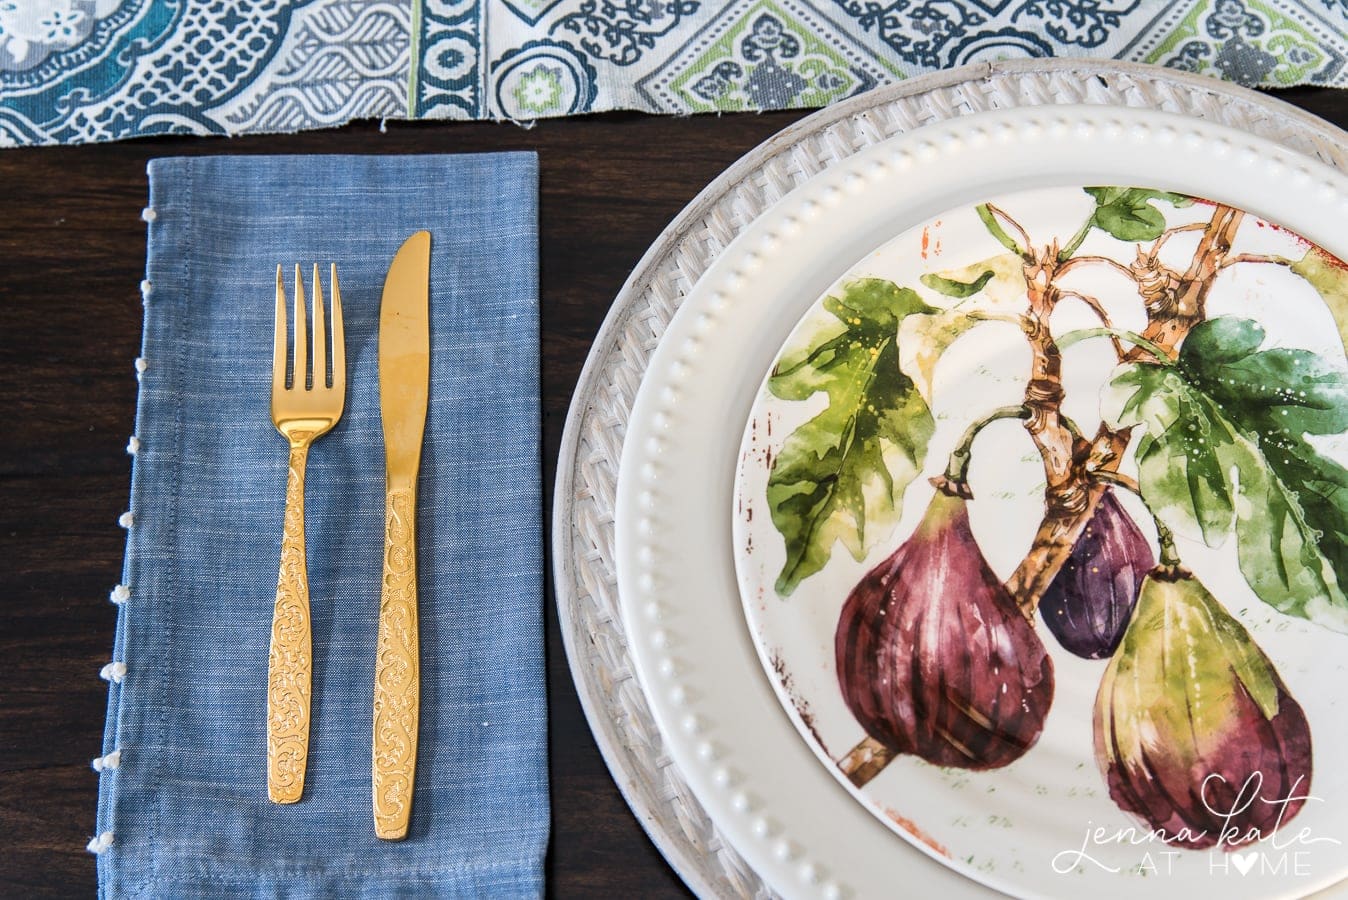 A close-up, top view of the place settings with 1 decorated plate (diagram of figs), one plain white plate and a charger, near a blue napkin with gold utensils